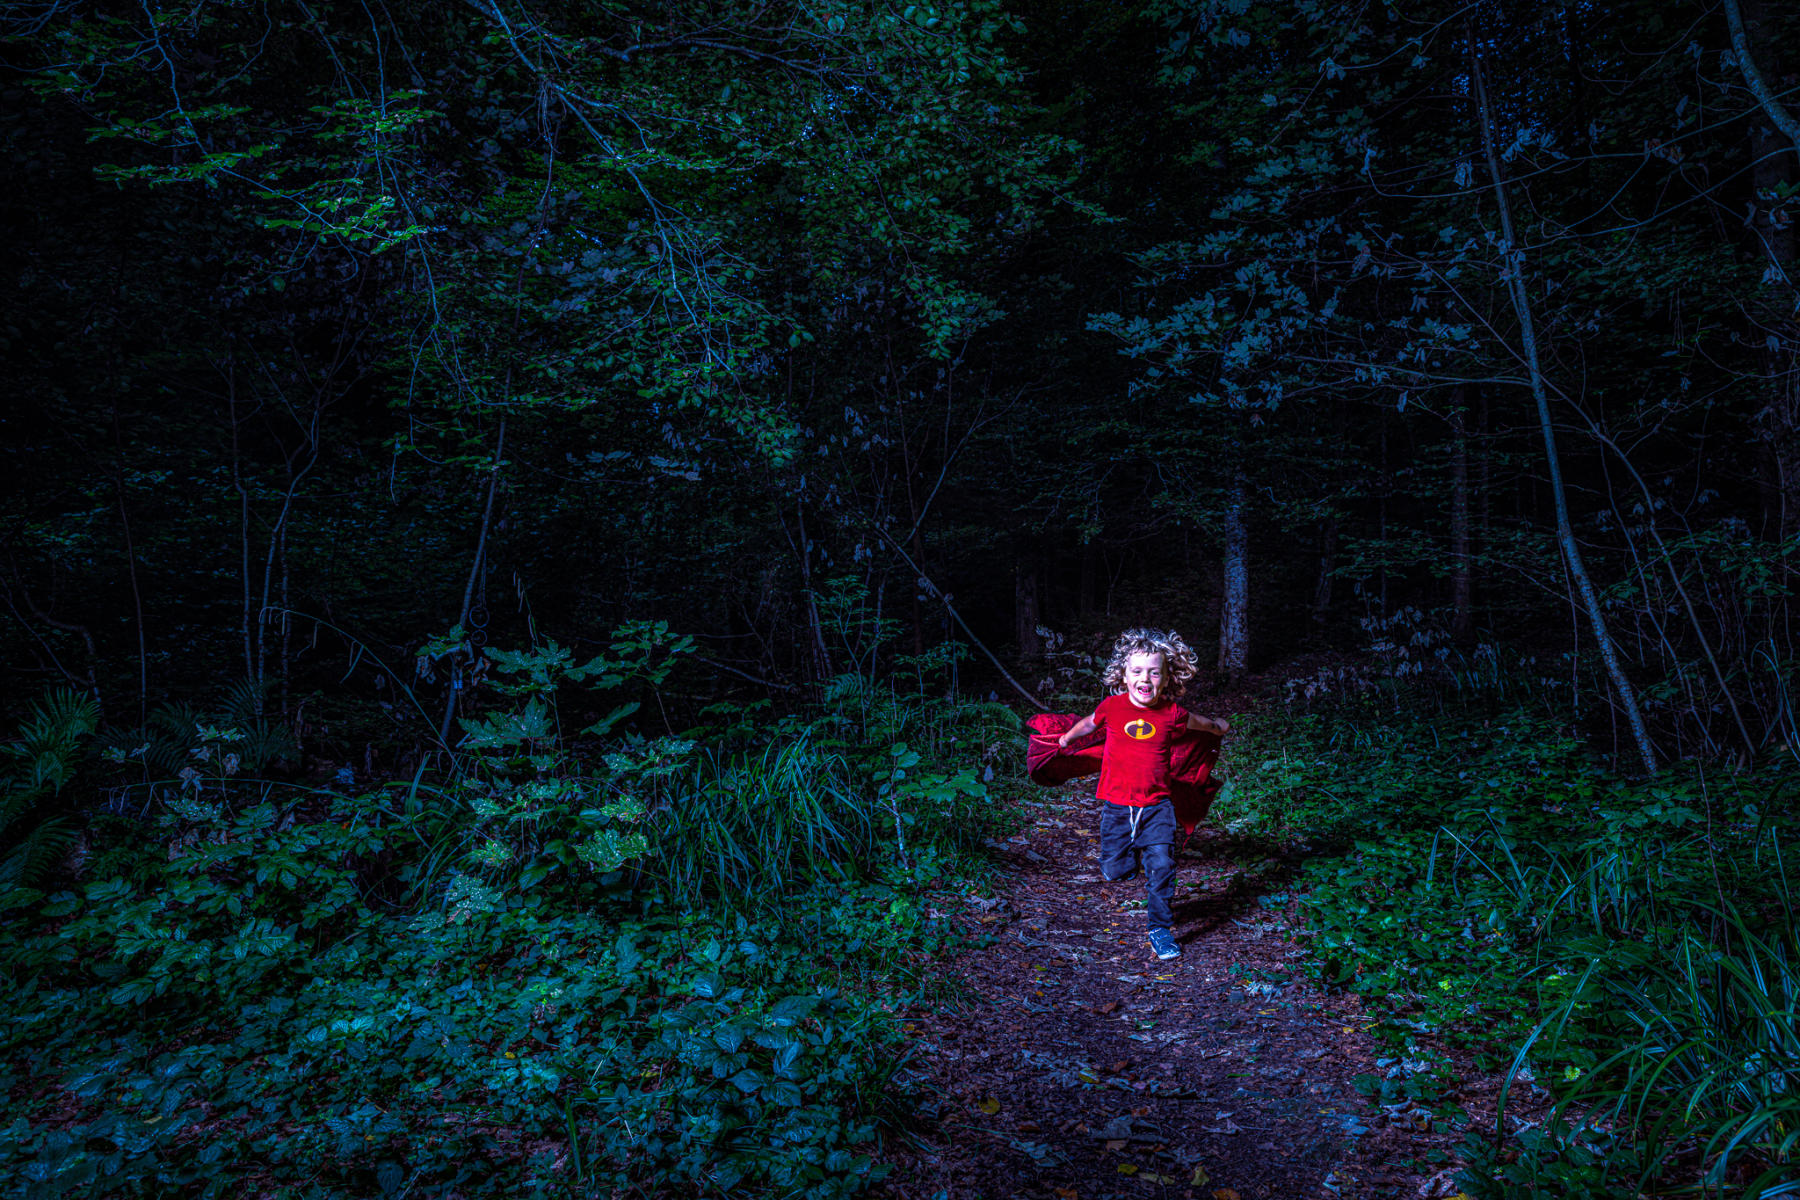 Into the Woods at Night, #4